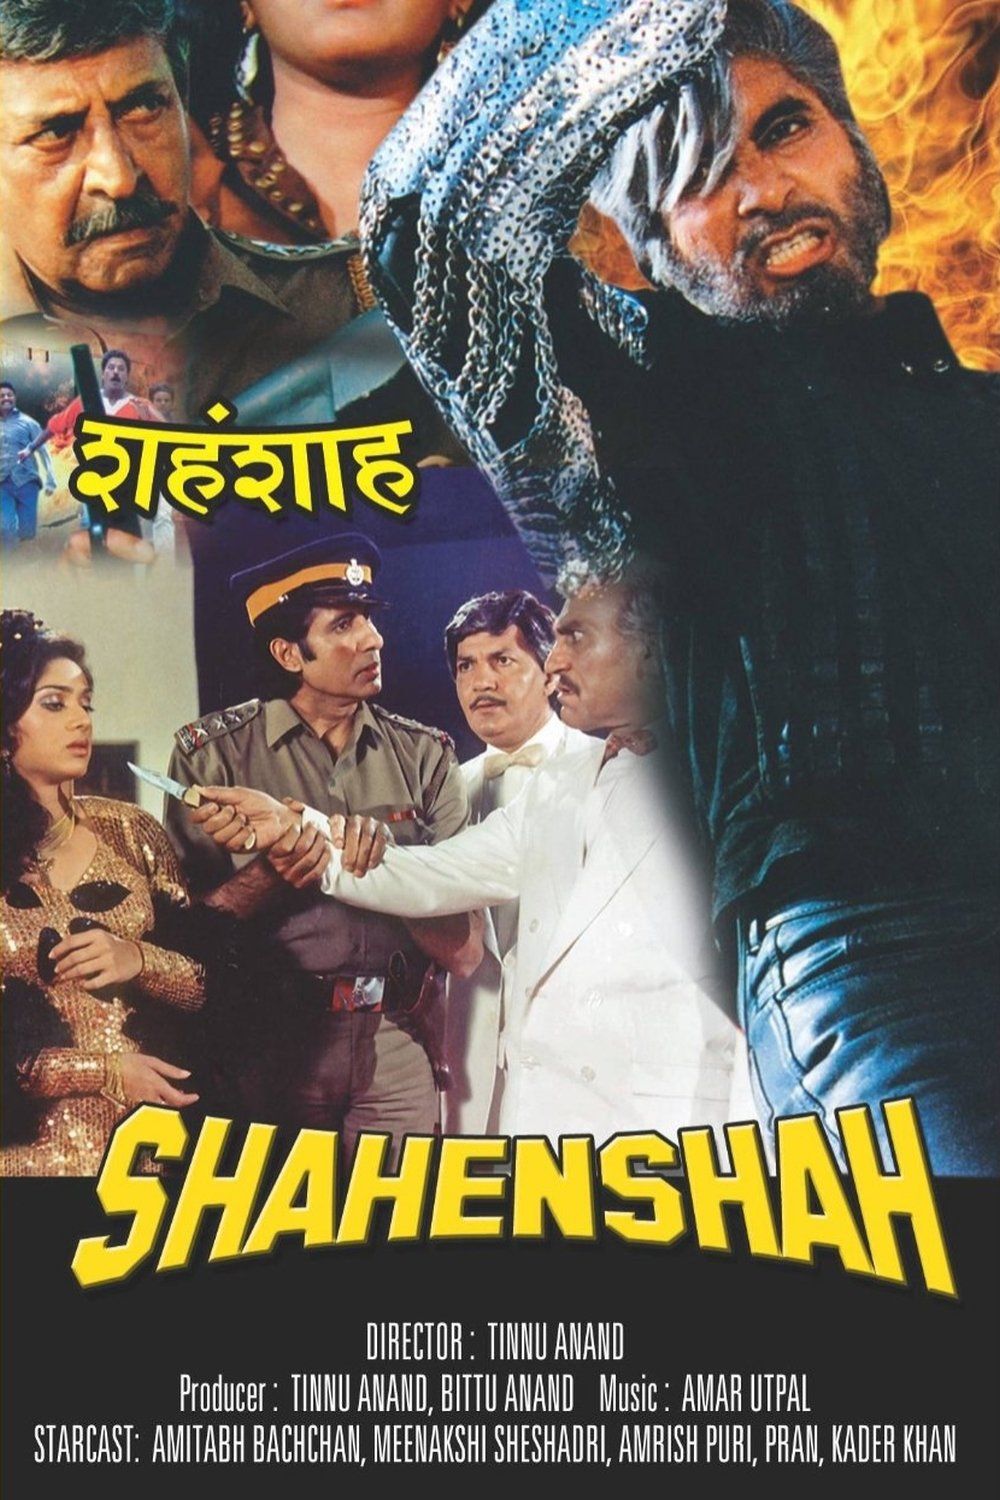 Big B’s Iconic Film Shahenshah To Be Remade; Confirms Producer And Actor Tinnu Anand